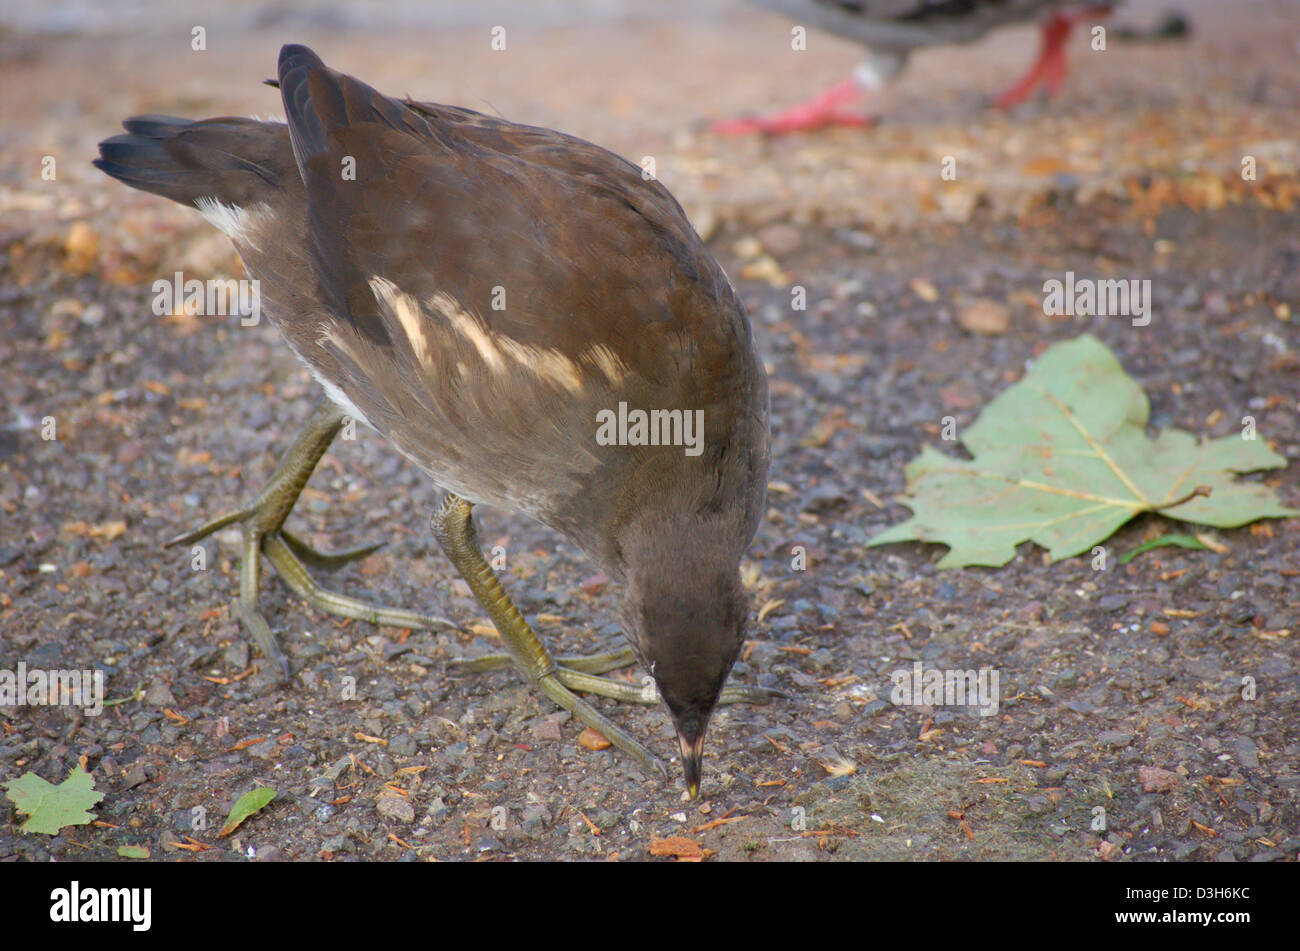 Juvenile Common Moorhen in a park in London, England Stock Photo